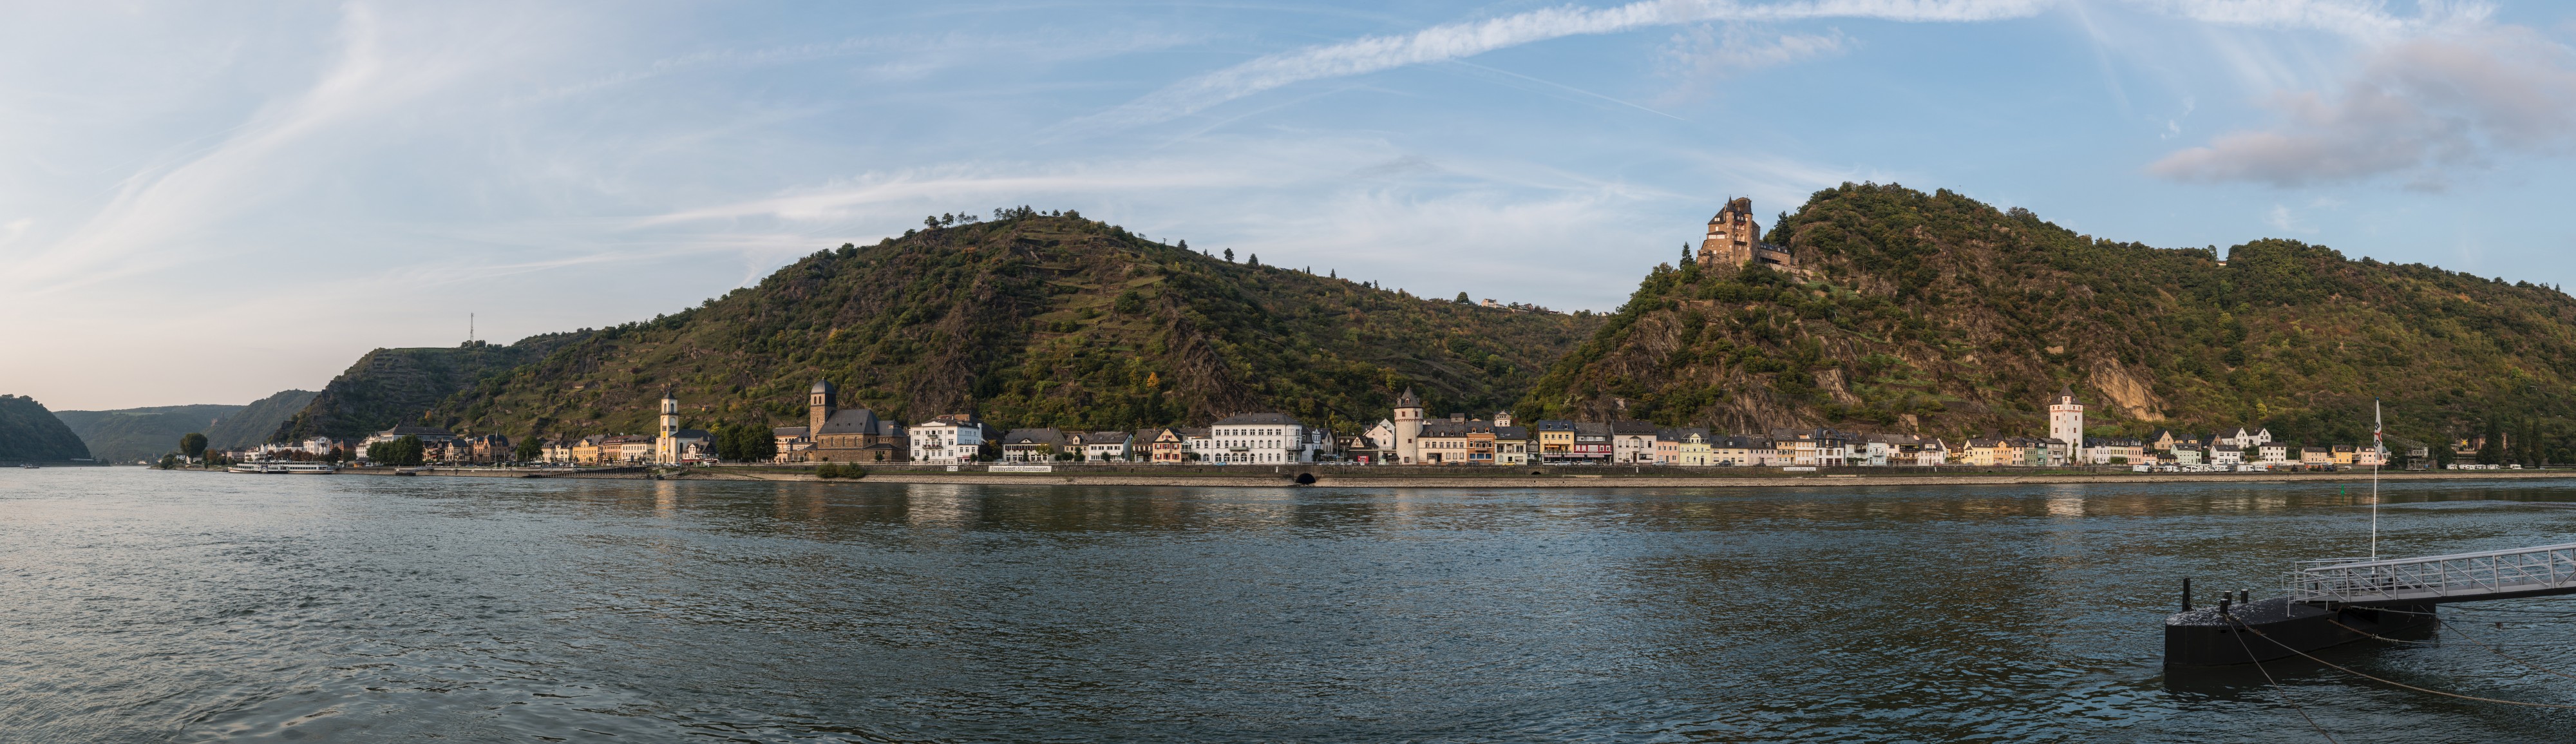 Panorama of St. Goarshausen from St. Goar ferry terminal 20141007 1